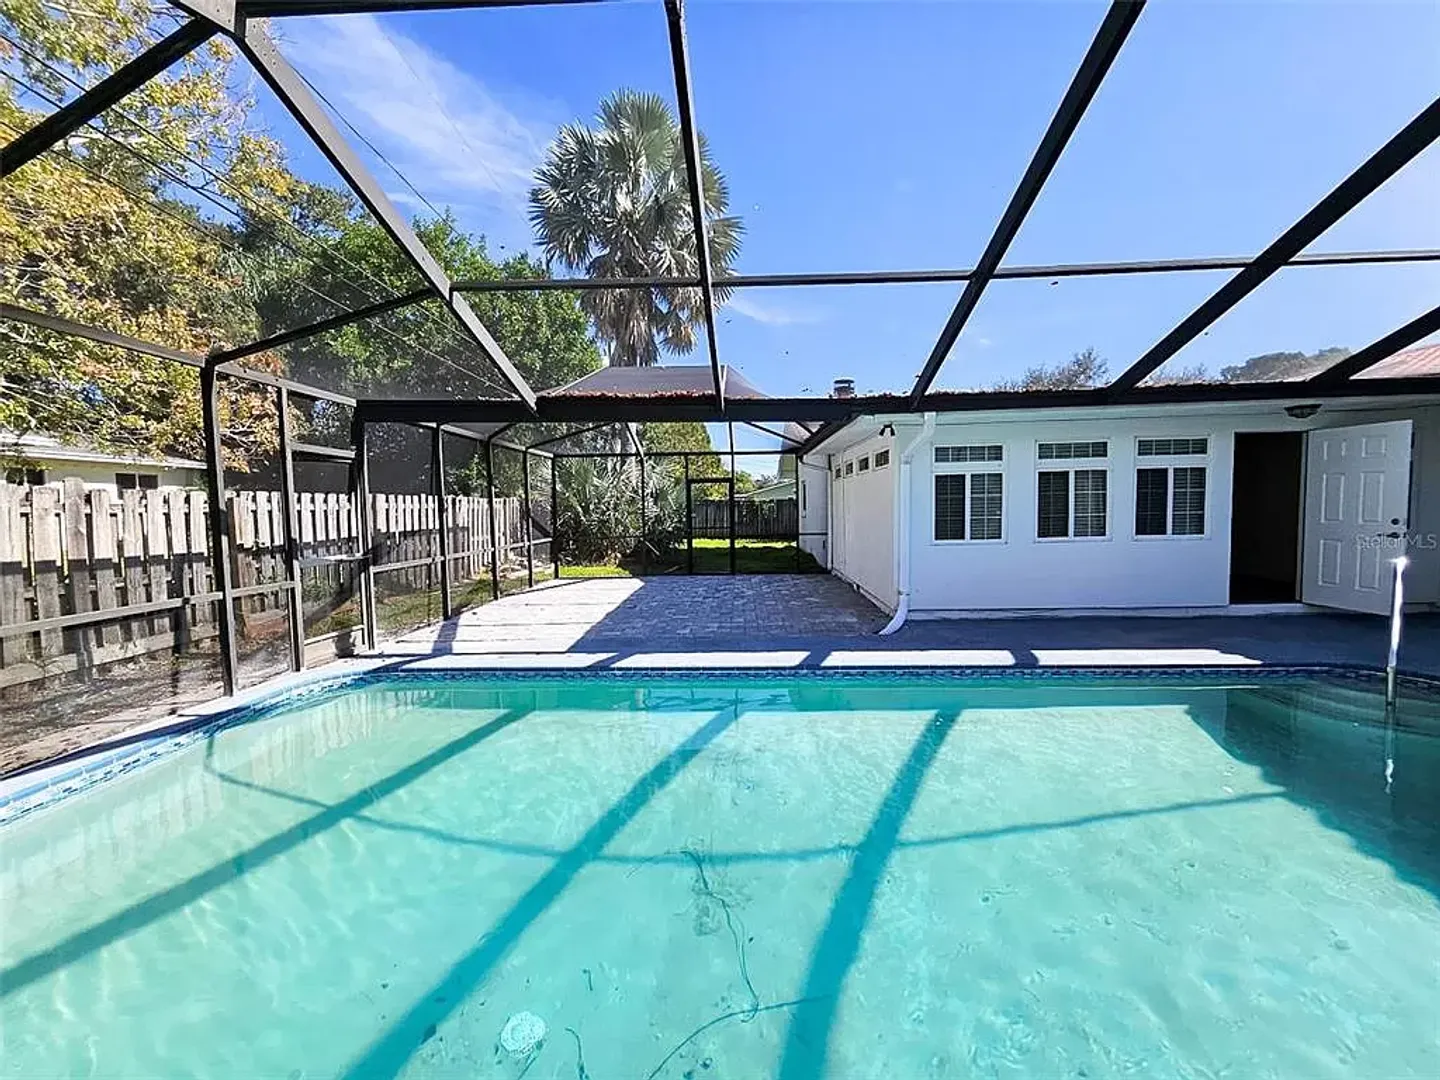 Come and see this beautiful, updated pool home in Clearwater Florida